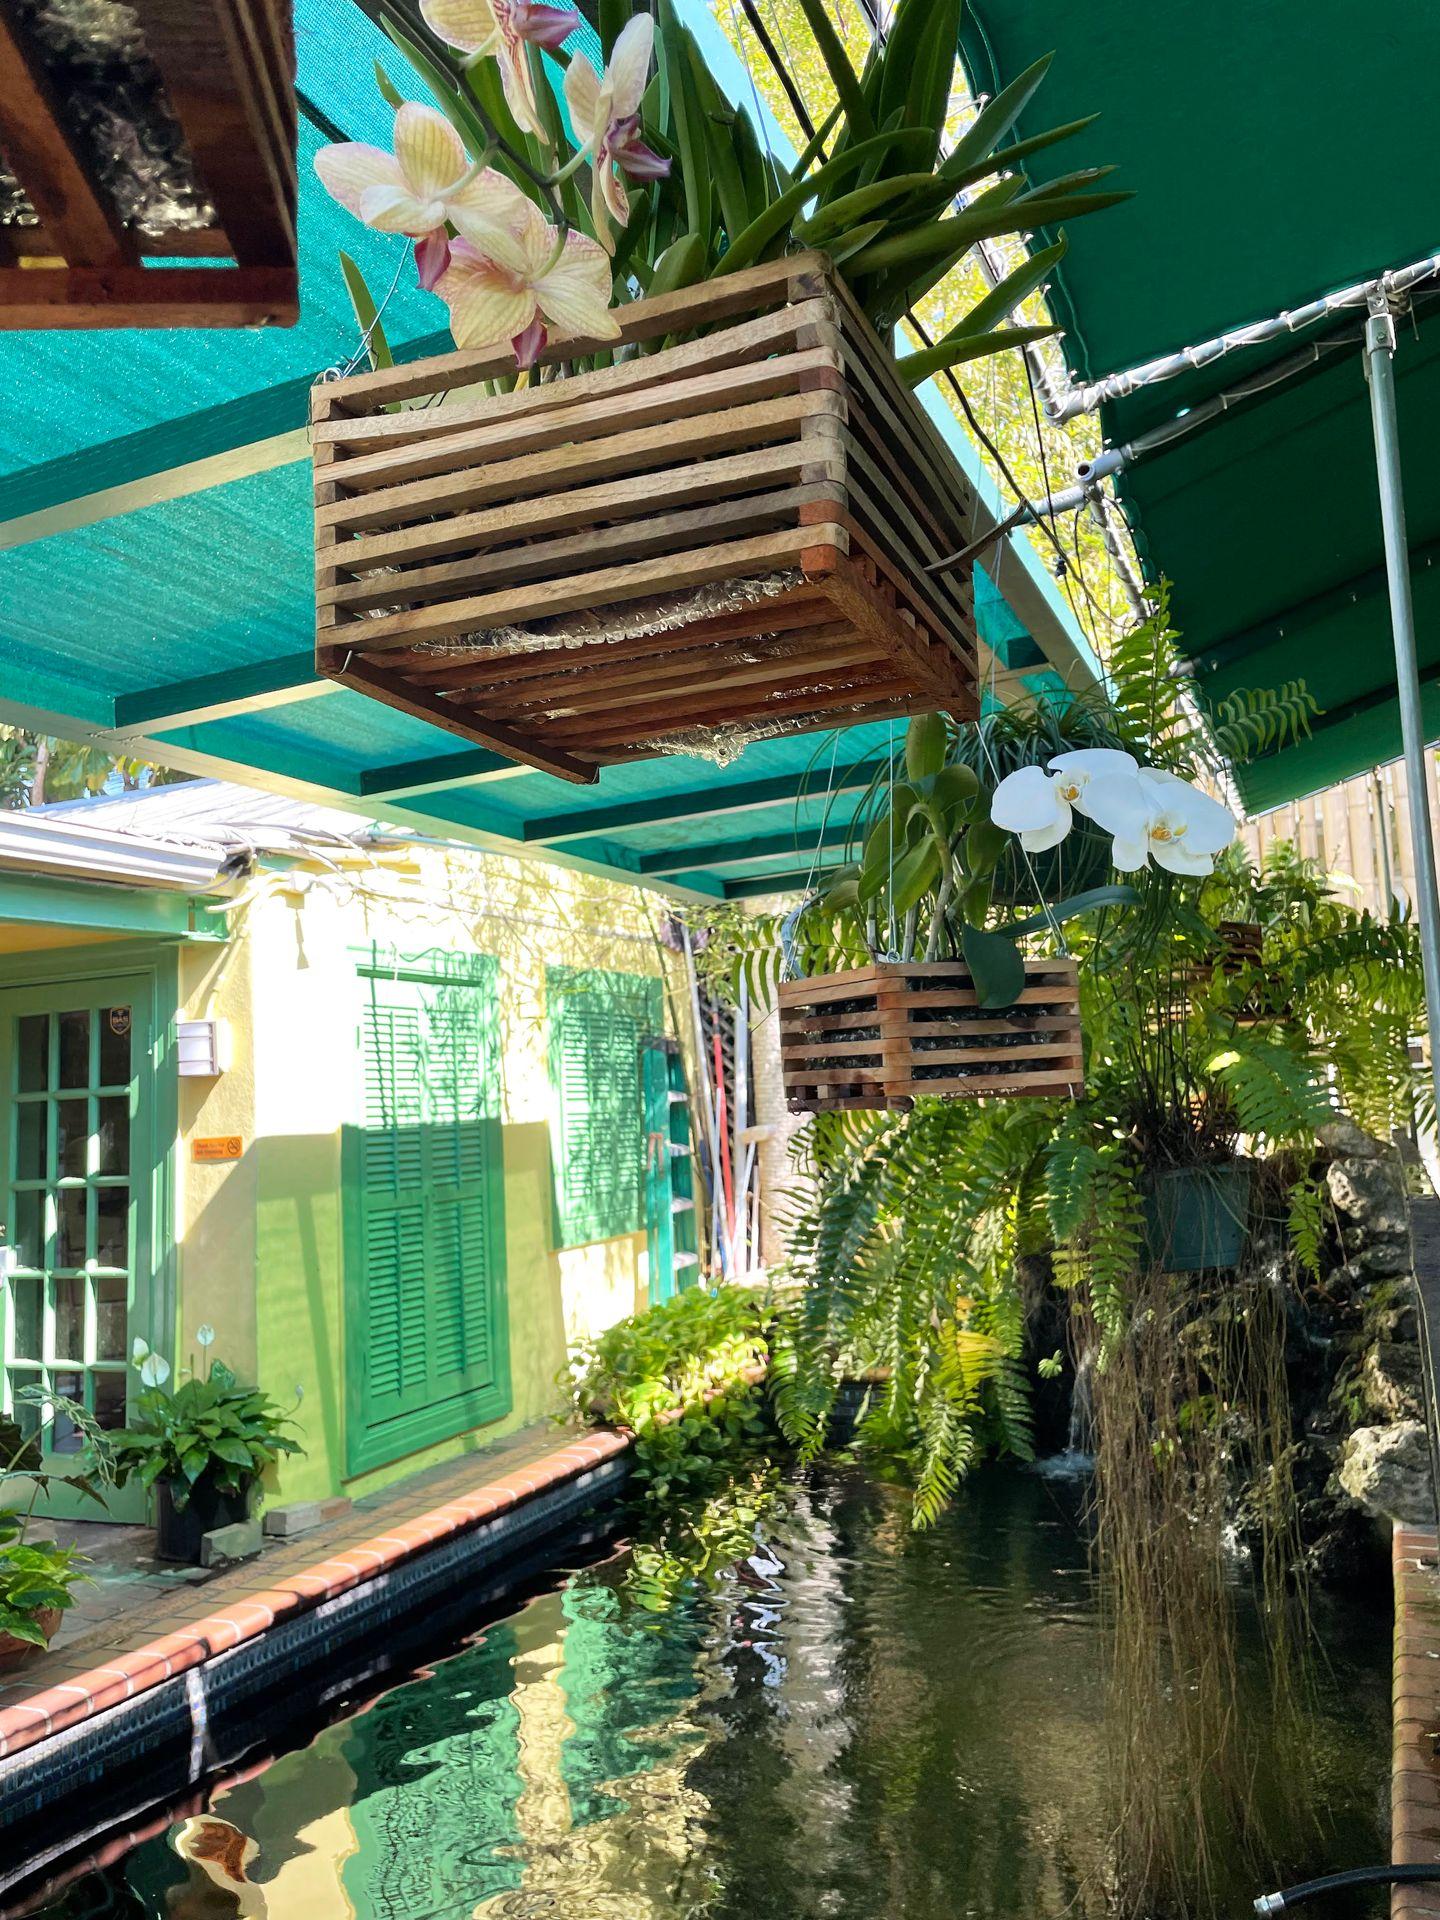 The koi pond in the backyard of Kermit's Key Lime Shoppe. There are hanging plants and green shutters in the background